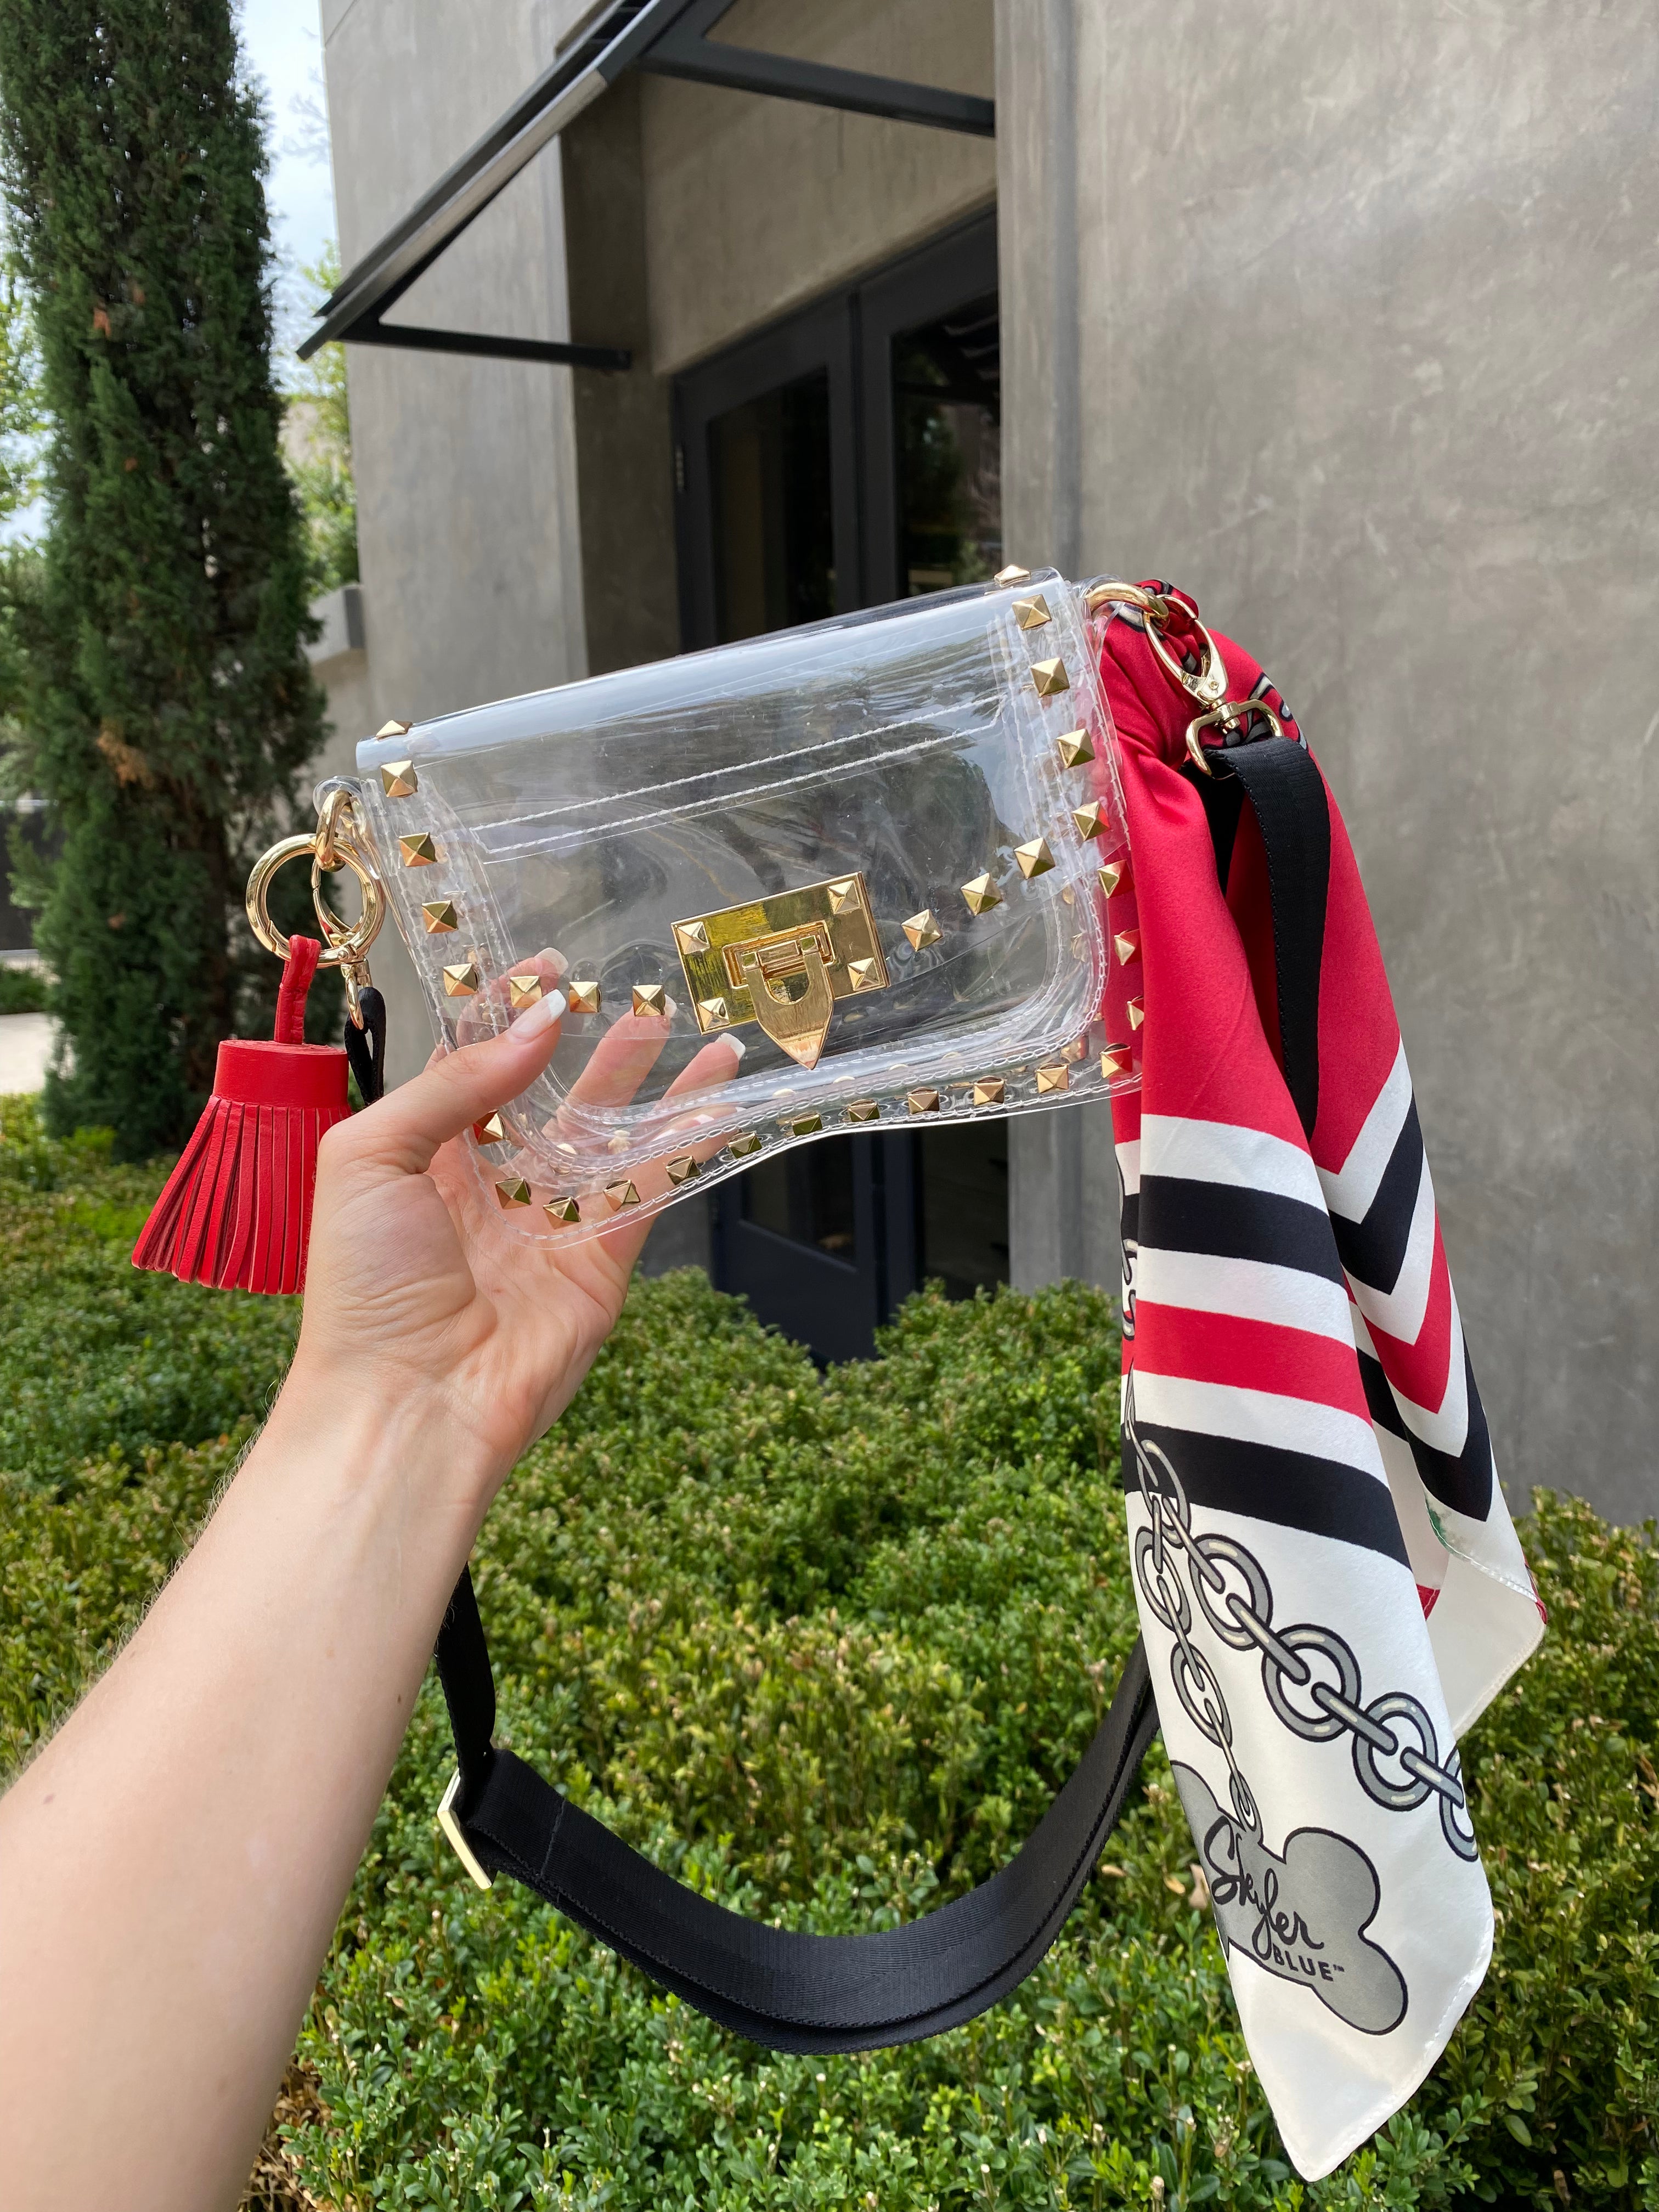 Skyler Blue’s The Athens 001 Small Studded Clear Bag stadium approved clear bag / clear purse including adjustable, nylon webbing shoulder or crossbody strap with herringbone weave and gold hardware, 60-centimeter 100% silk twill scarf, and 100% genuine leather tassel. 